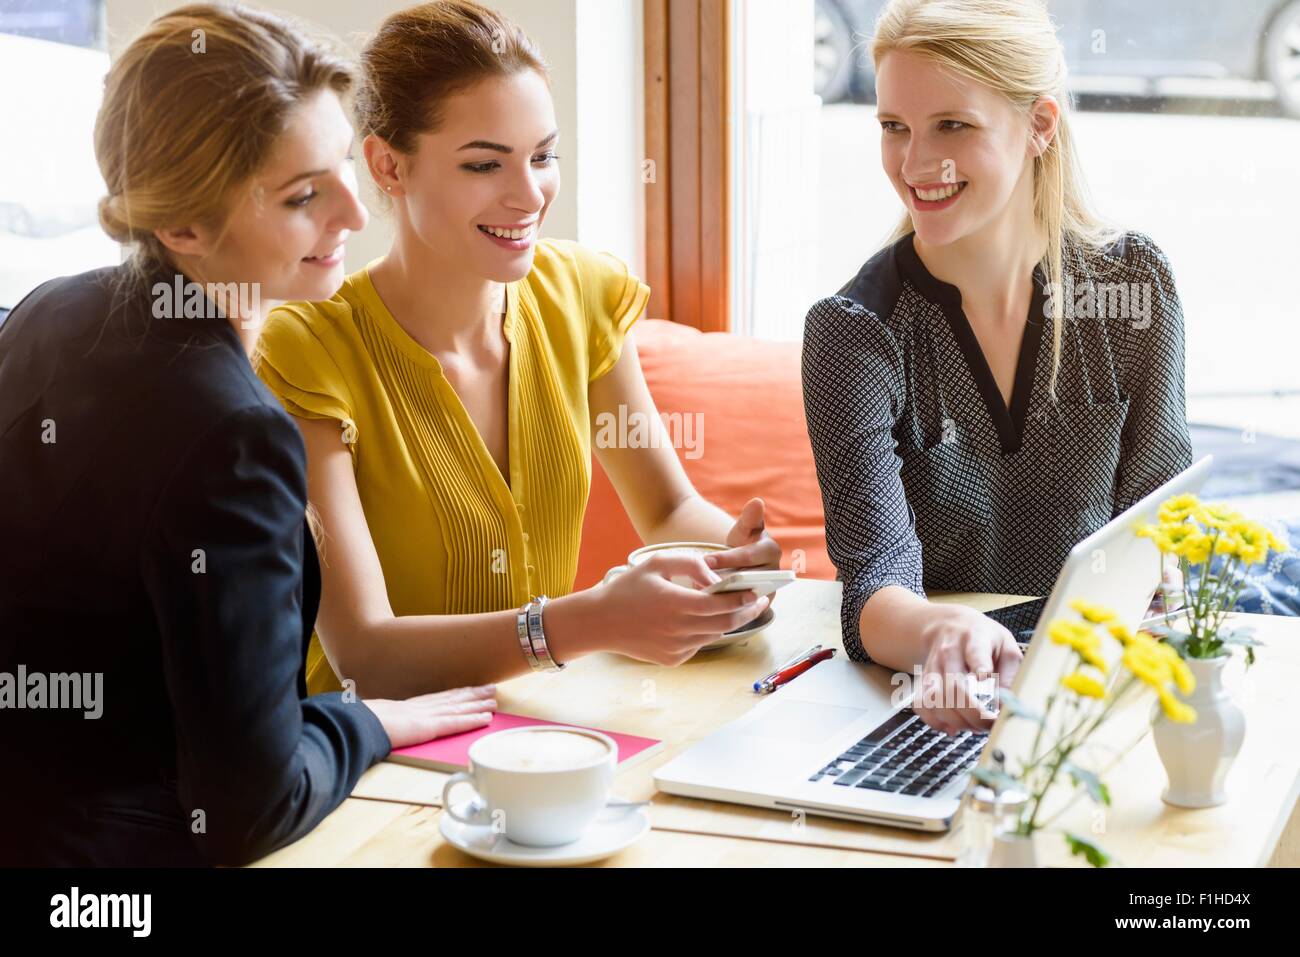 Three young women looking at laptop in cafe Stock Photo